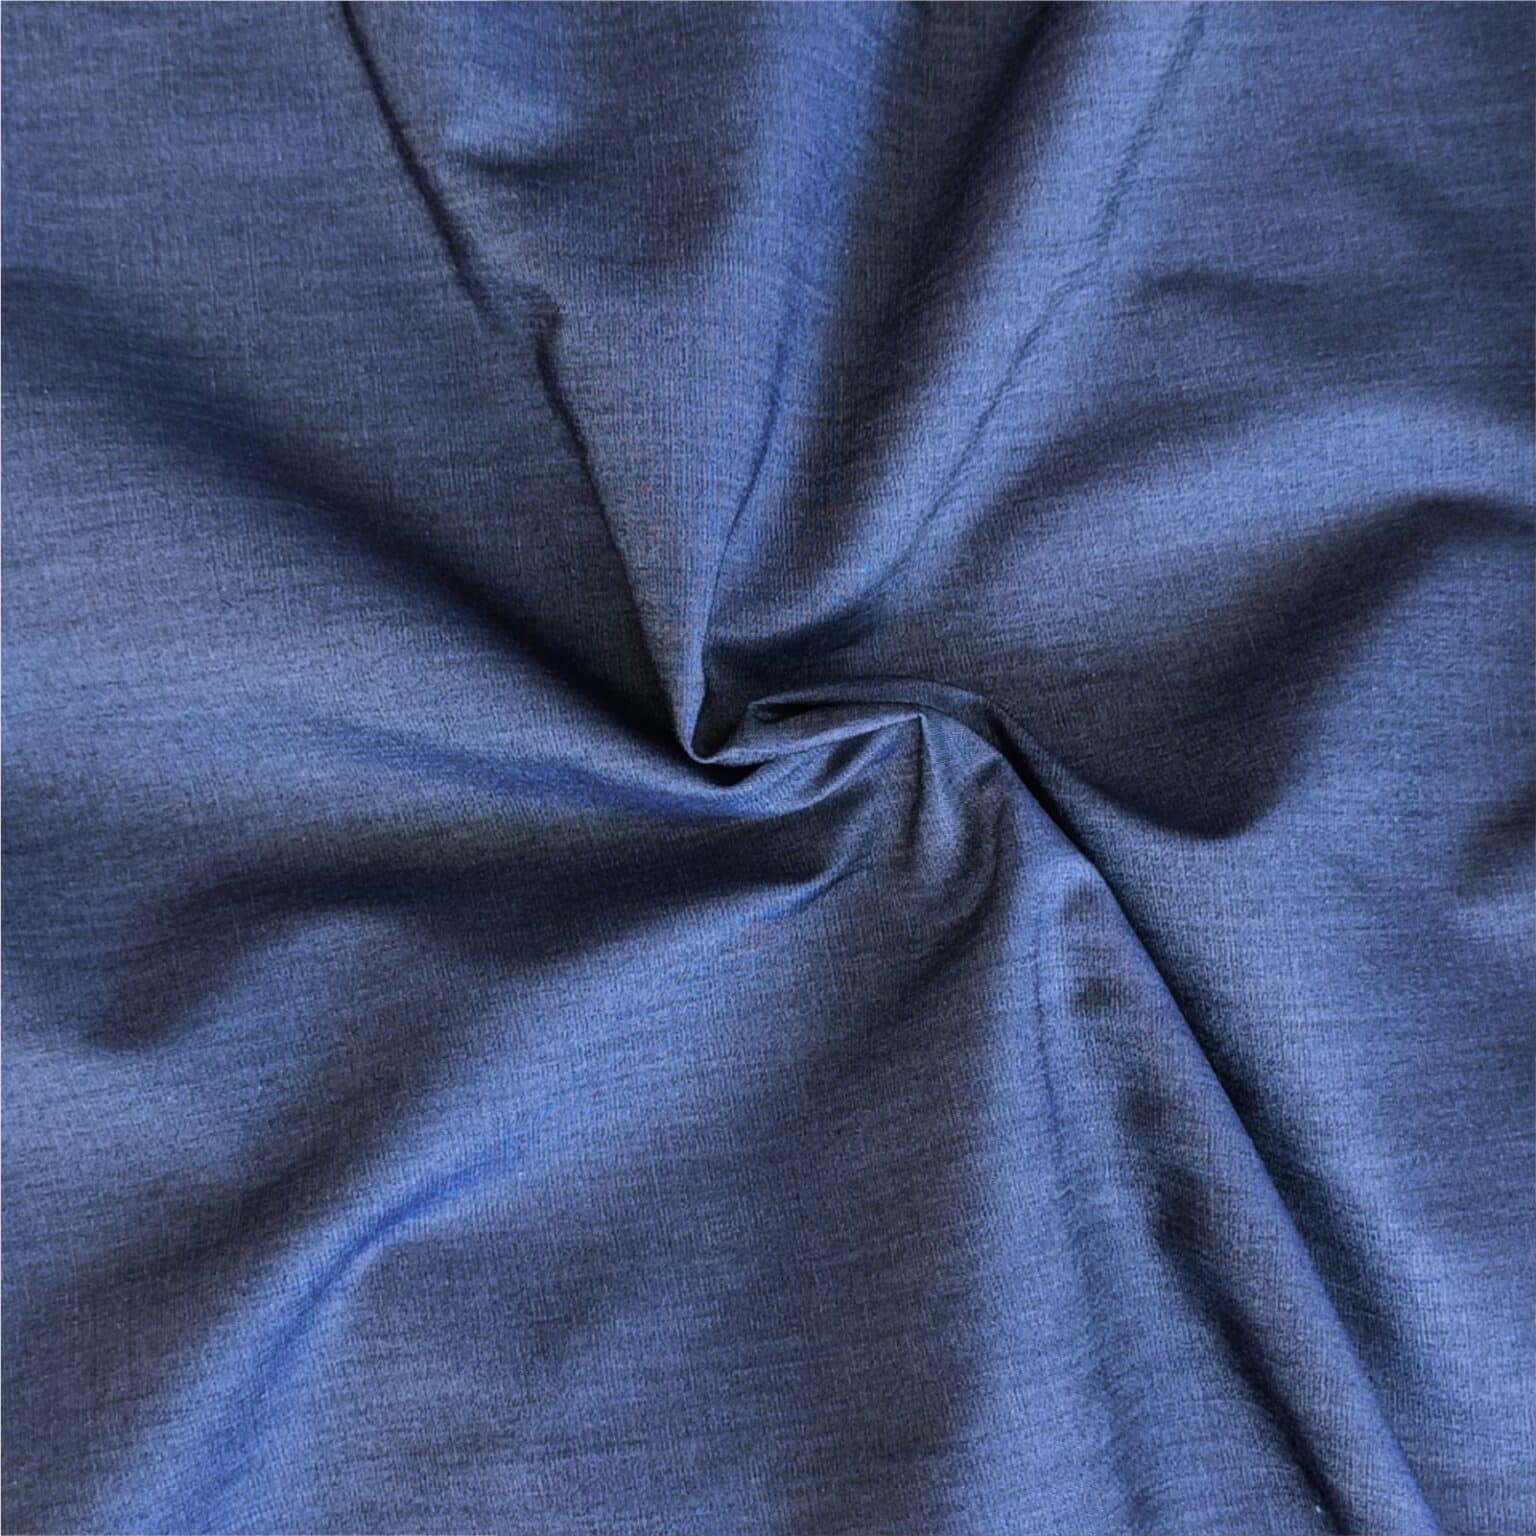 blue combed chambray fabric | More Sewing